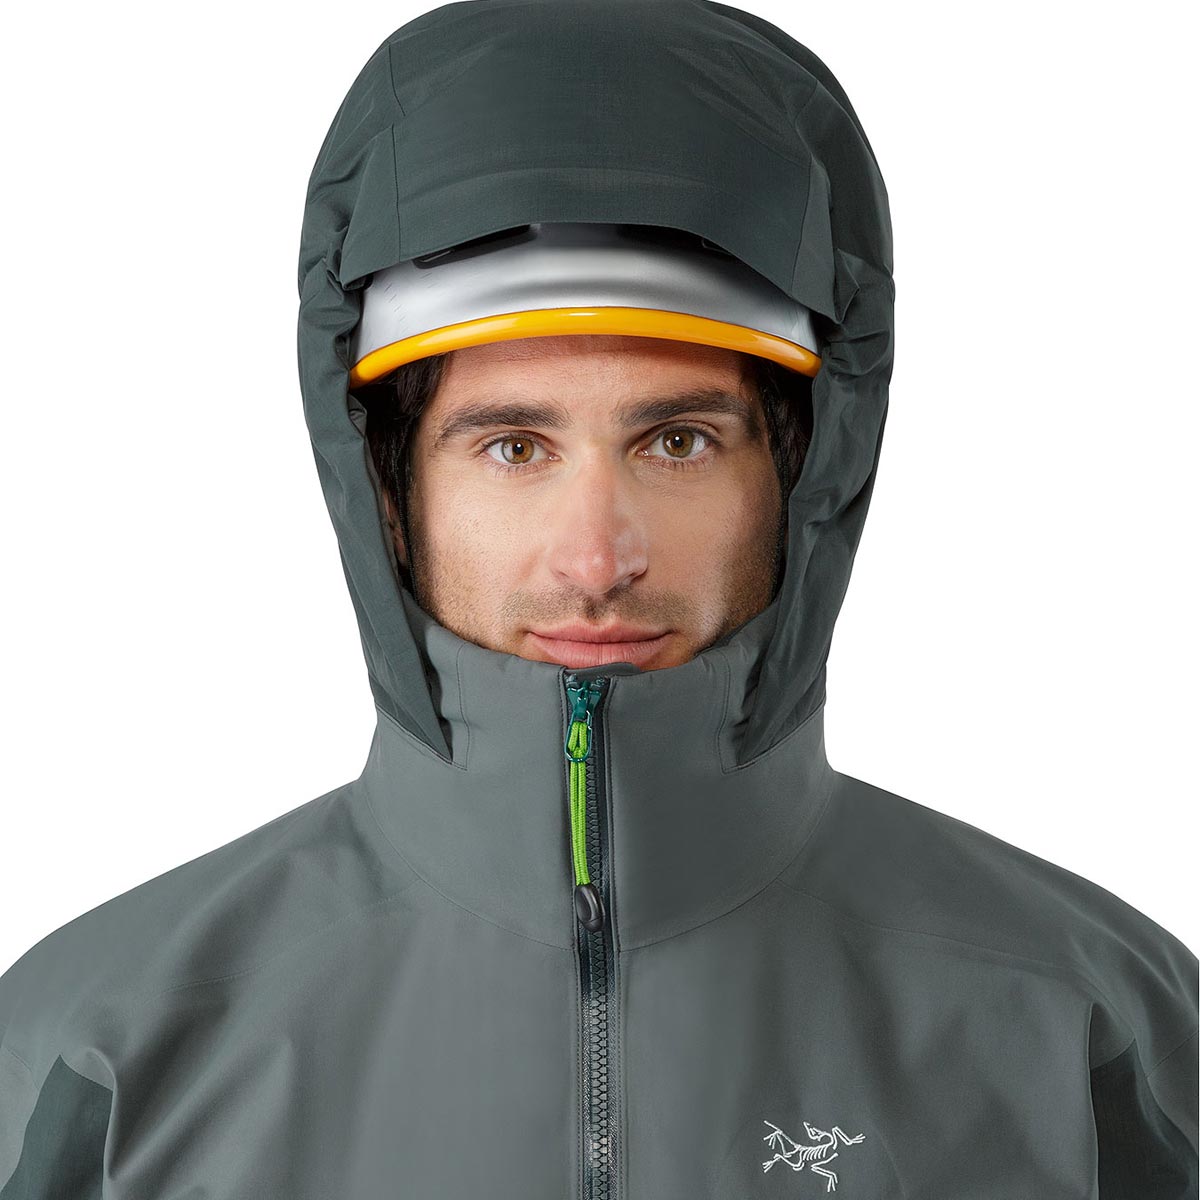 arcteryx fission sv review